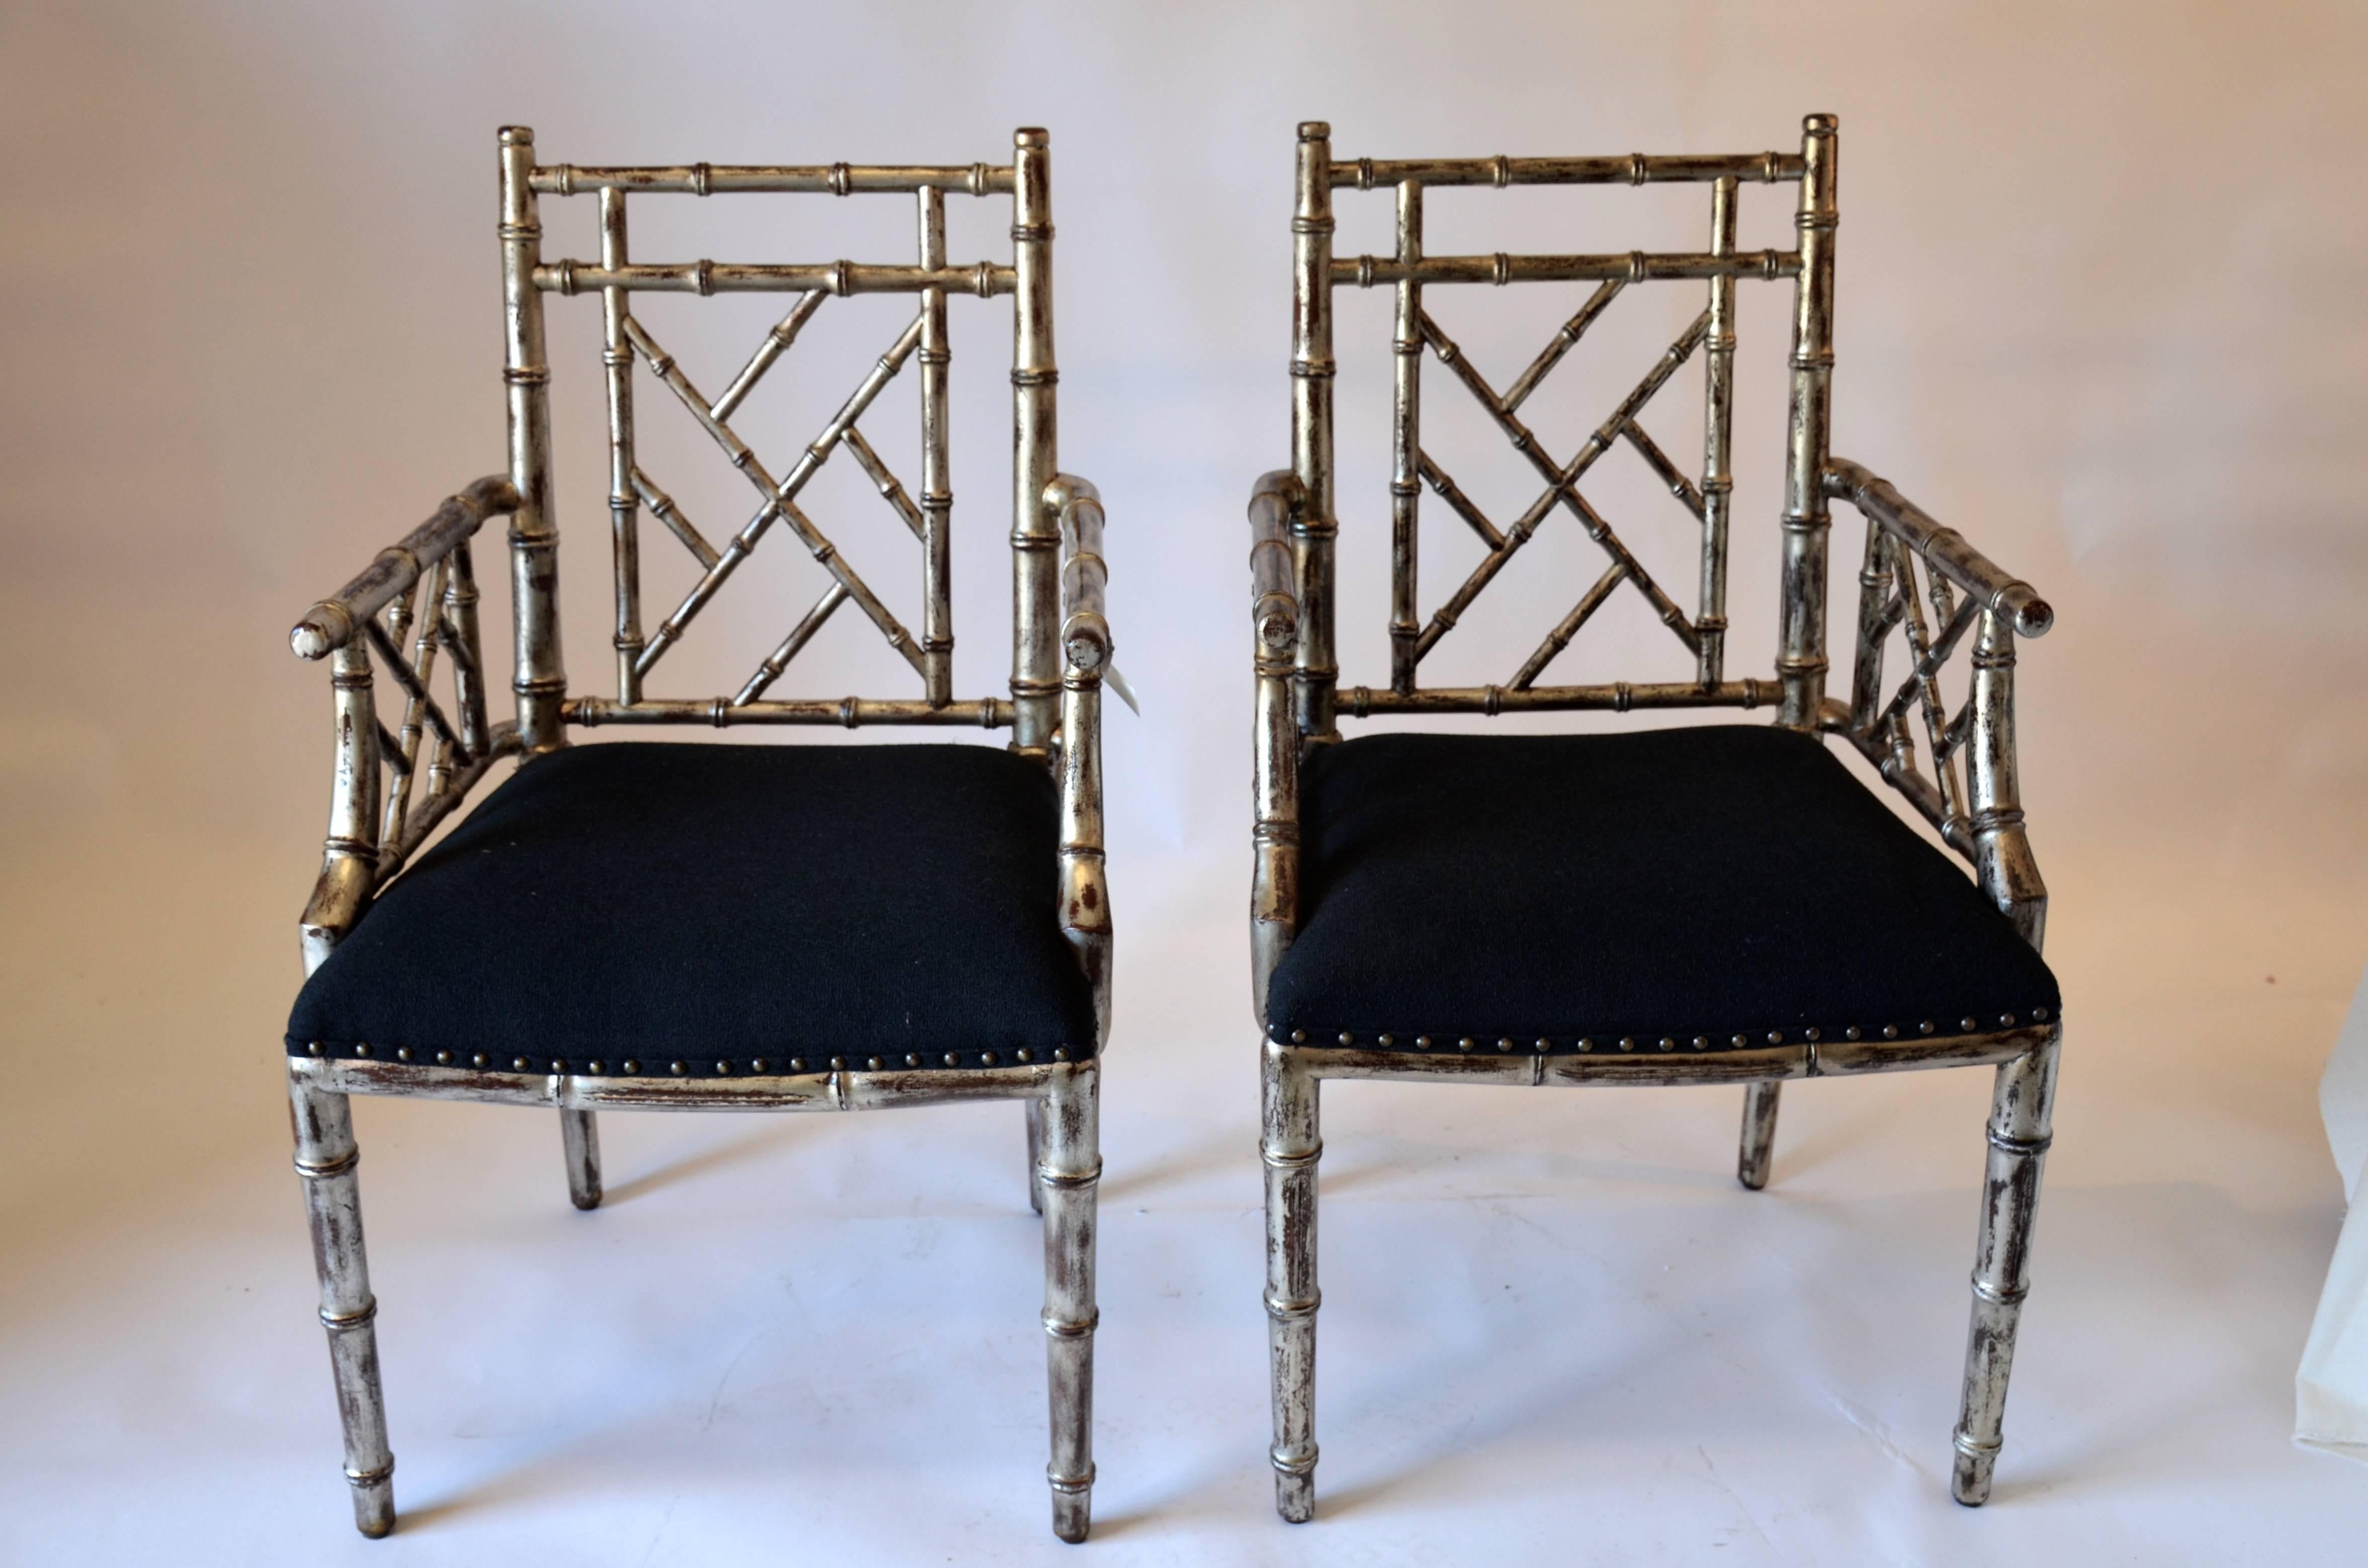 Available in two or four, rogue silver gilt chair with black upholstery 

$2350 per pair - please inquiry within about set of four.